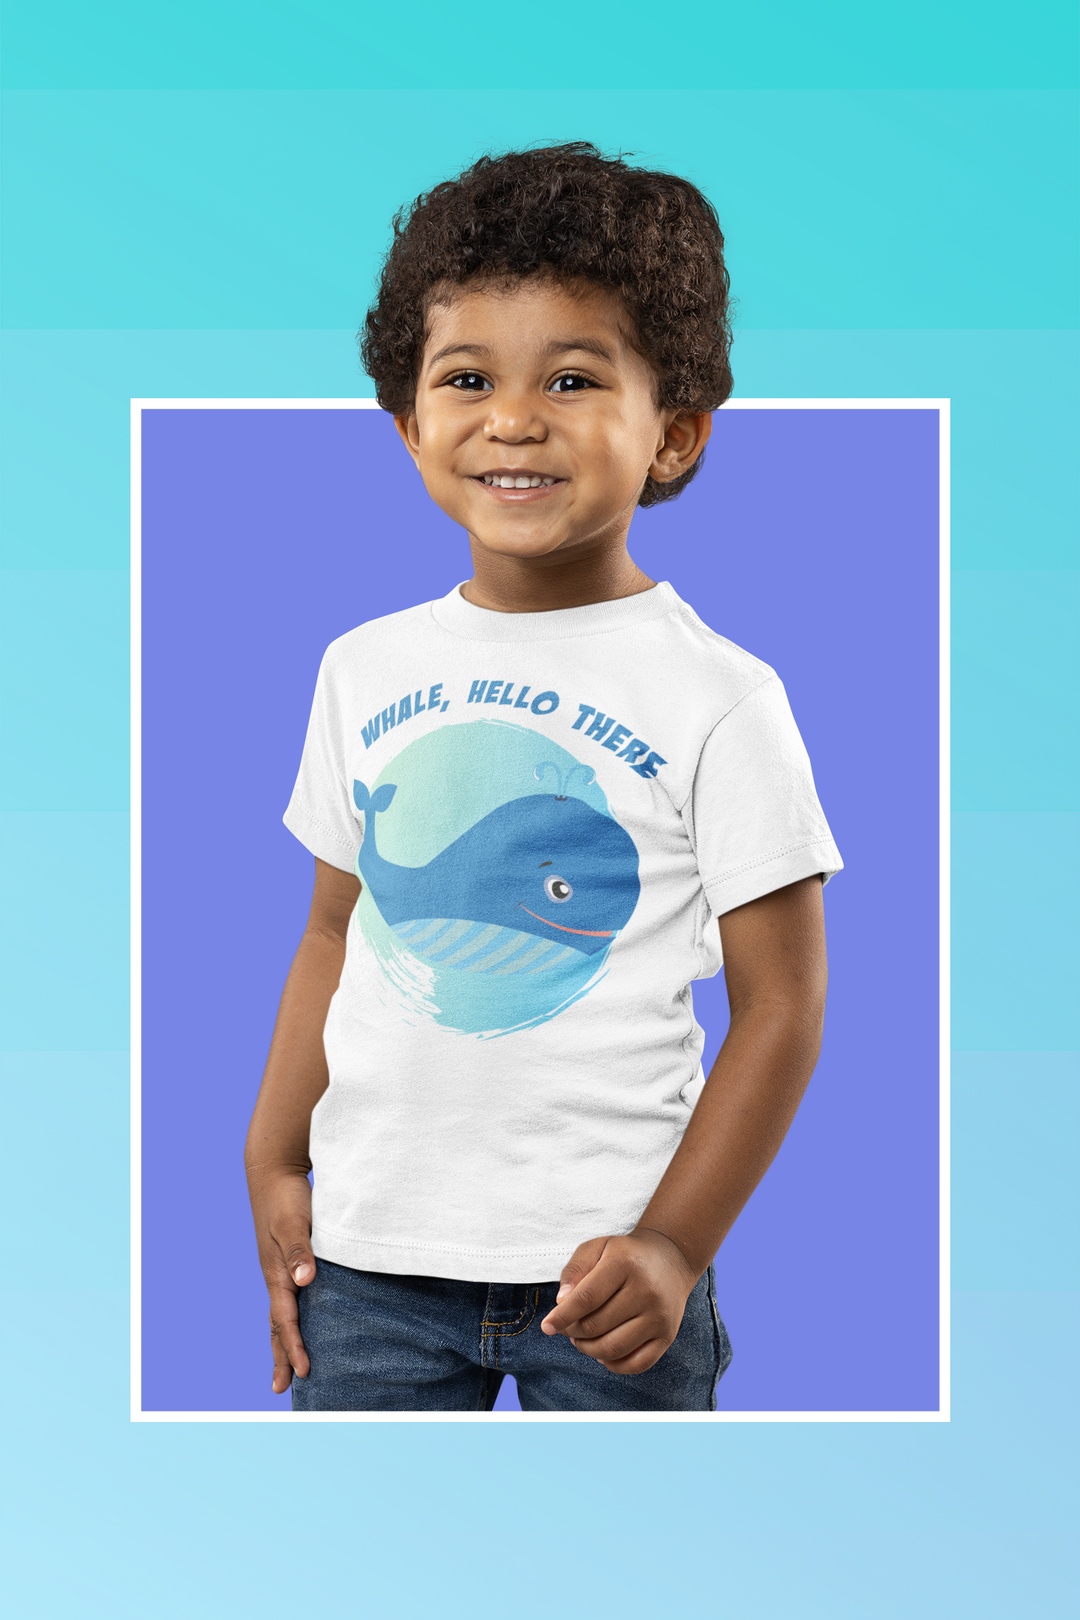 Whale Hello There. Short Sleeve T Shirt For Toddler And Kids. - TeesForToddlersandKids -  t-shirt - seasons, summer - whale-hello-there-short-sleeve-t-shirt-for-toddler-and-kids